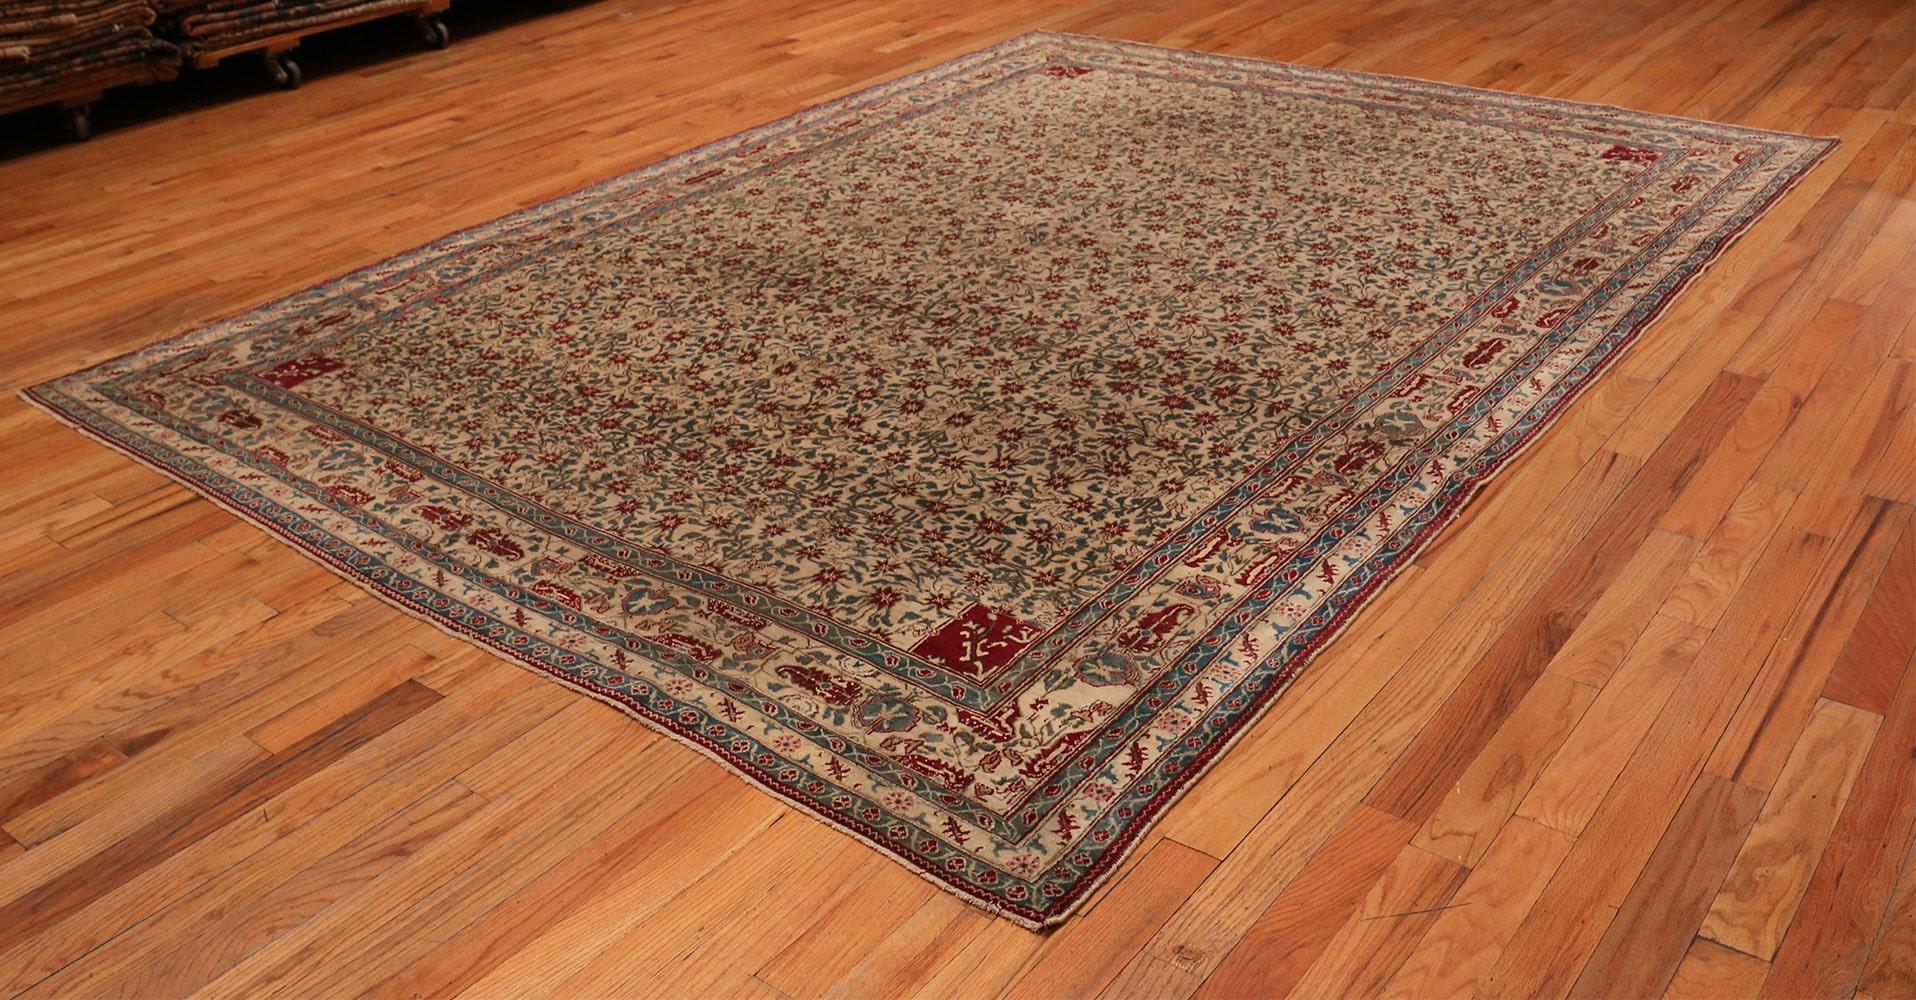 Antique Agra rug, India, Circa 1900. Size: 8 ft 10 in x 11 ft 6 in (2.69 m x 3.51 m).